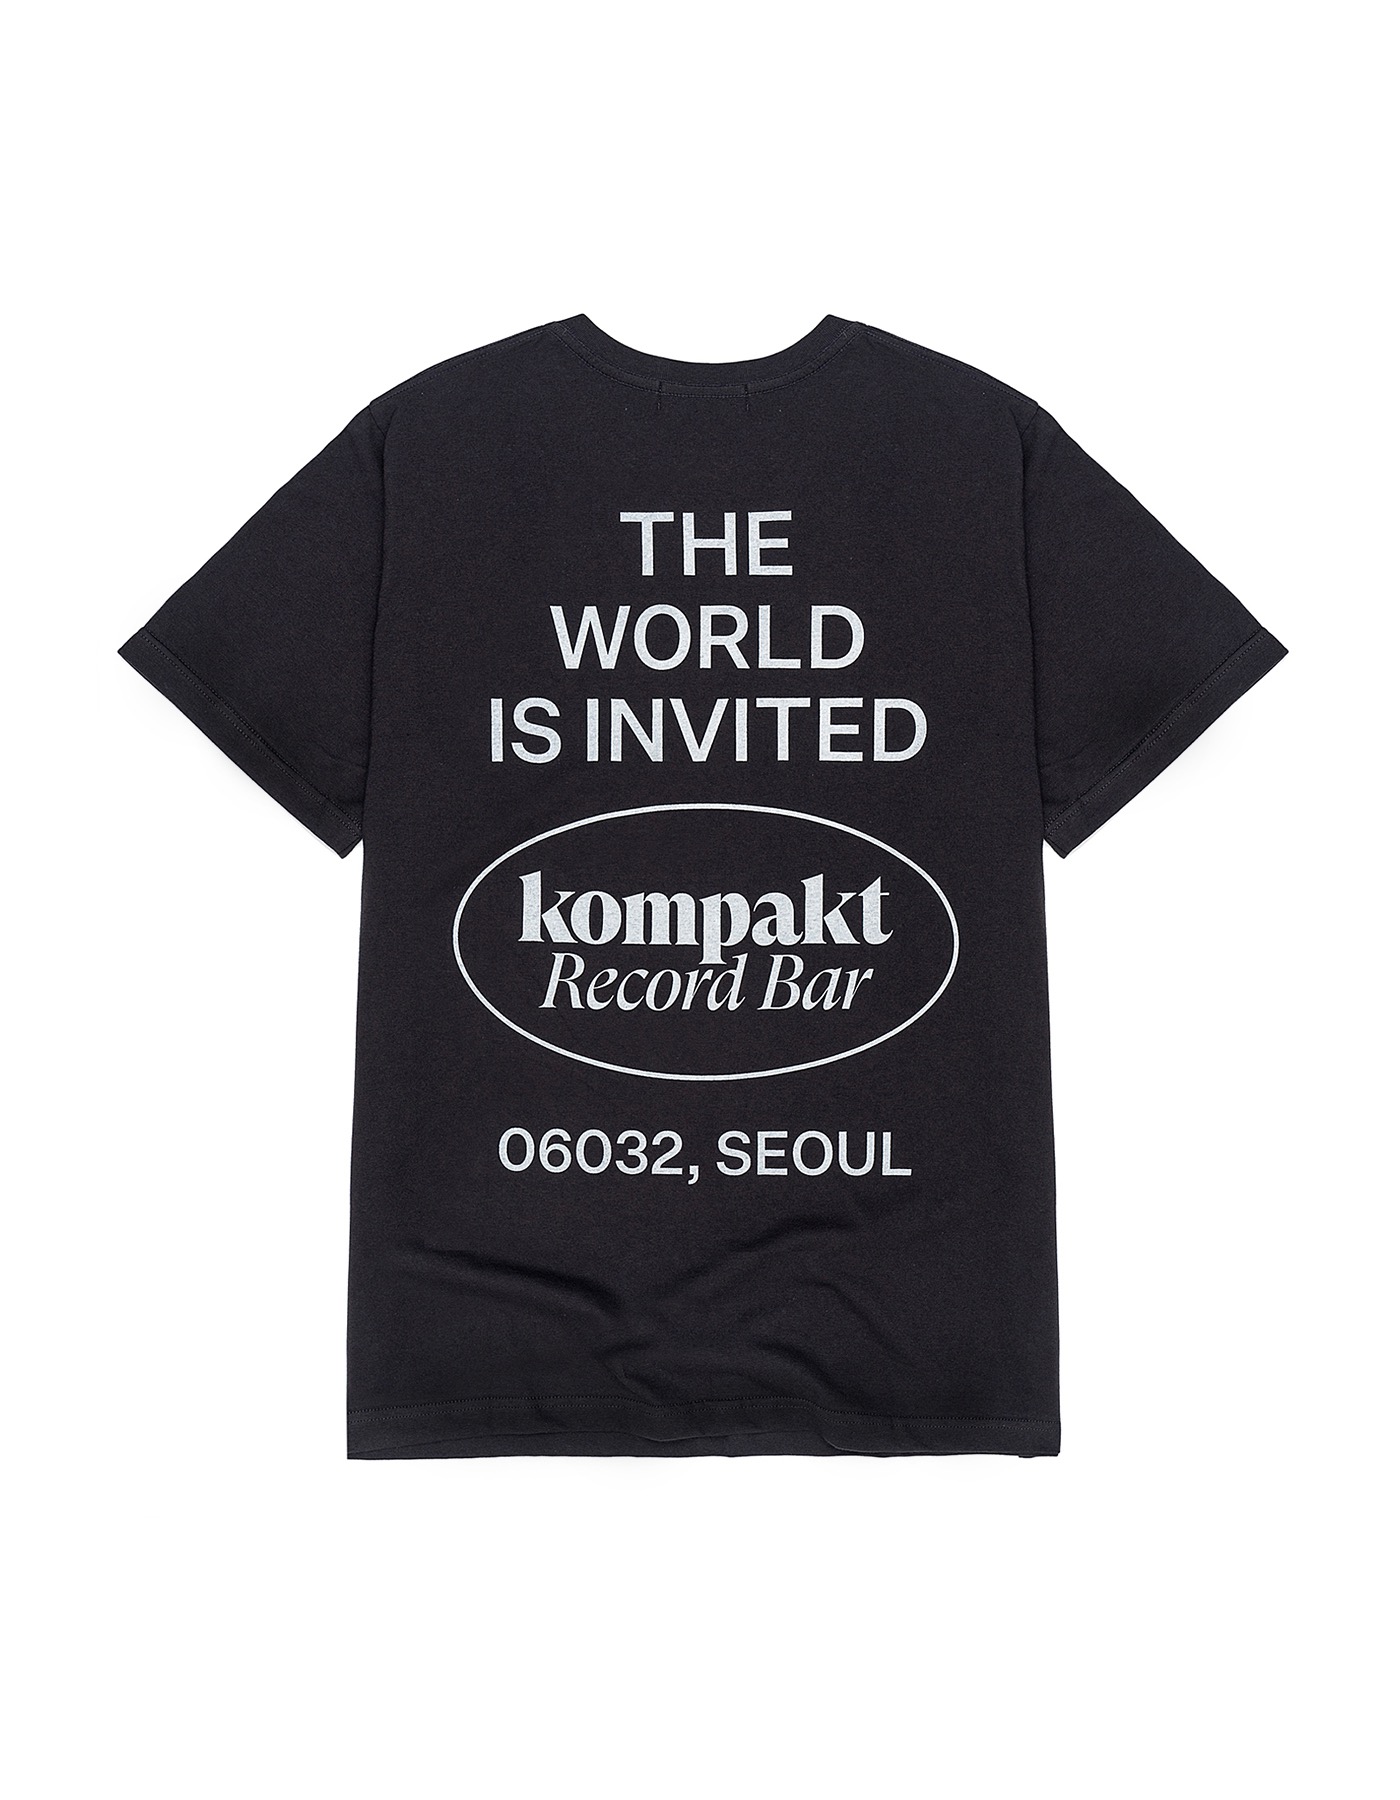 The World is Invited T-Shirt - Black